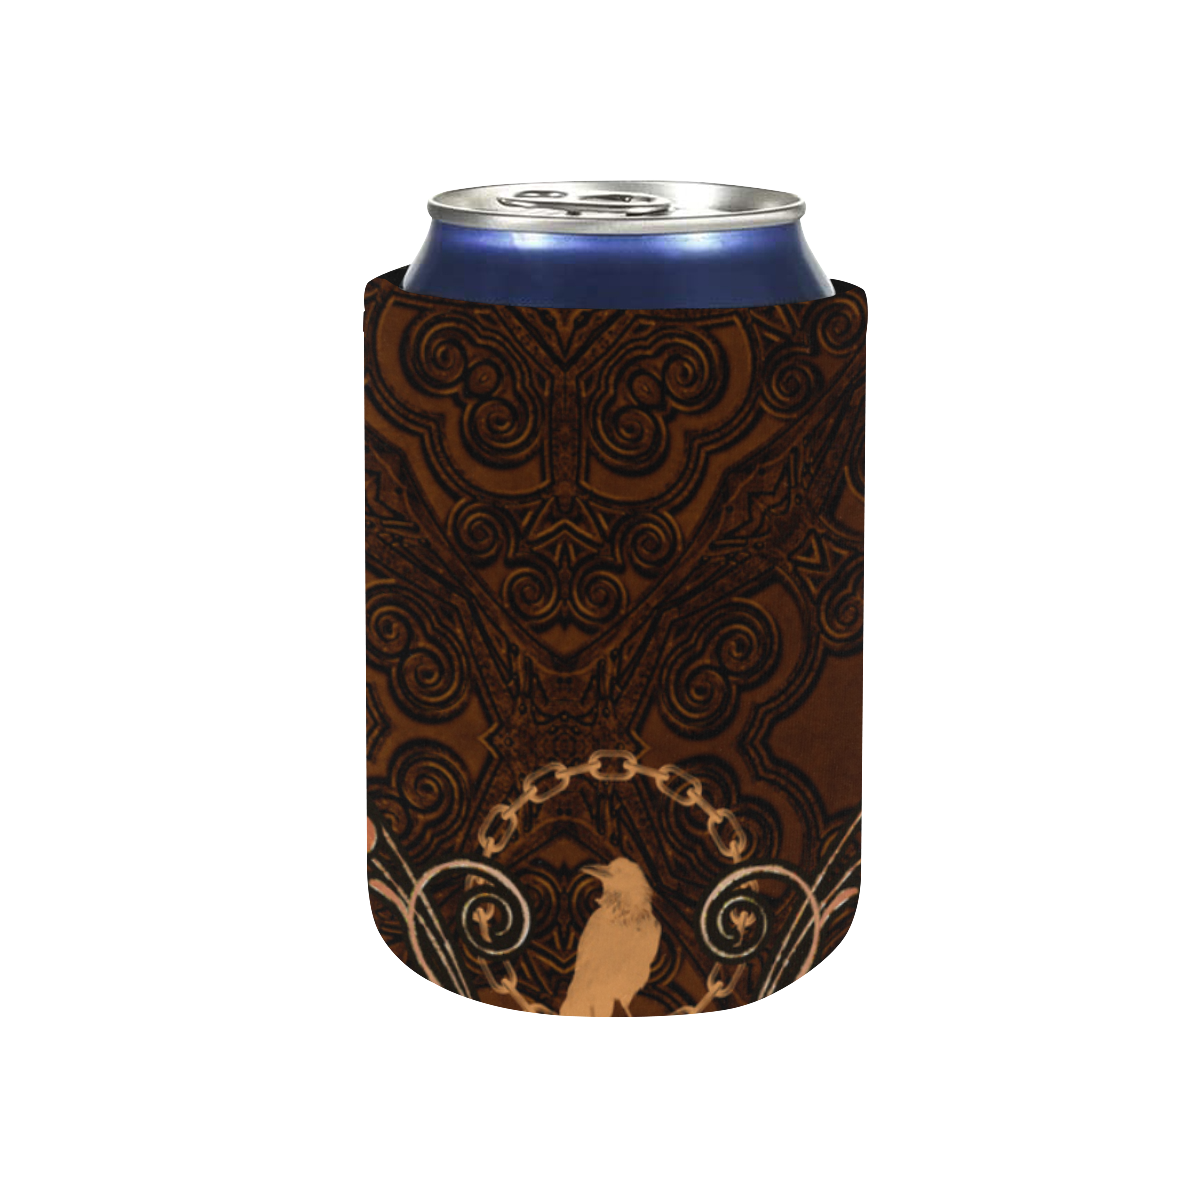 Floral design with crow Neoprene Can Cooler 4" x 2.7" dia.